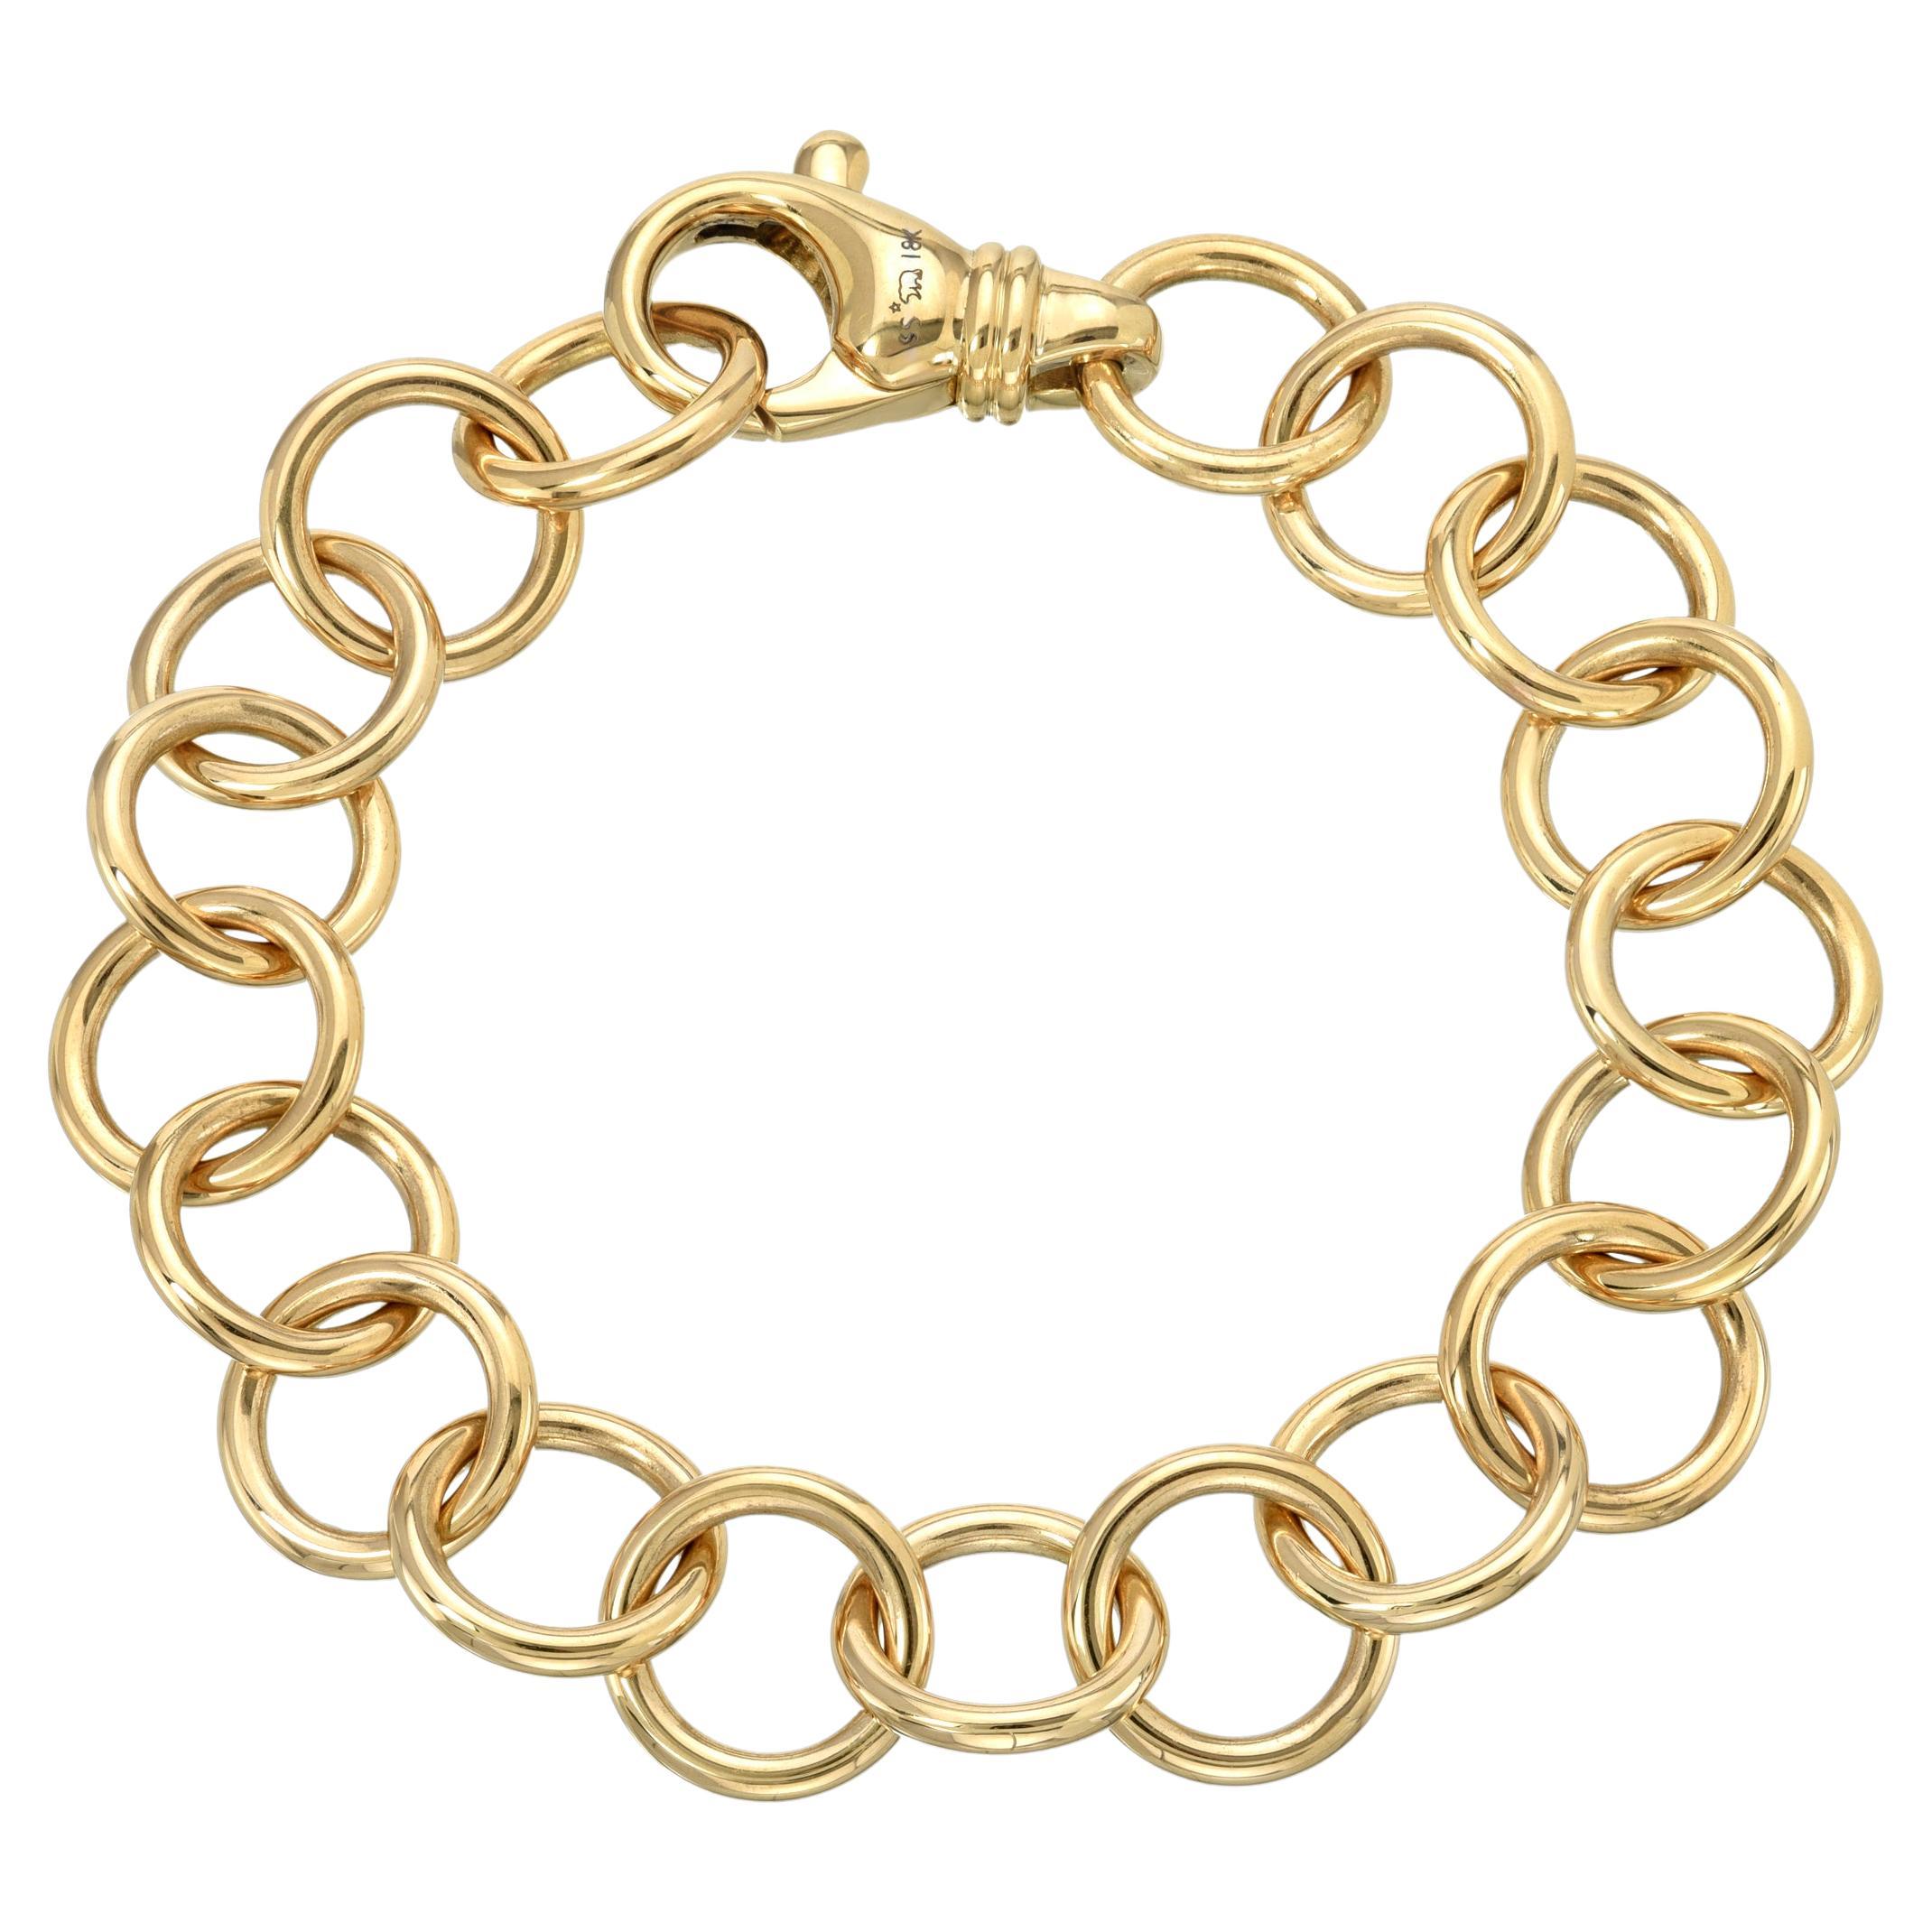 Handcrafted Club Bracelet in 18K Yellow Gold by Single Stone For Sale